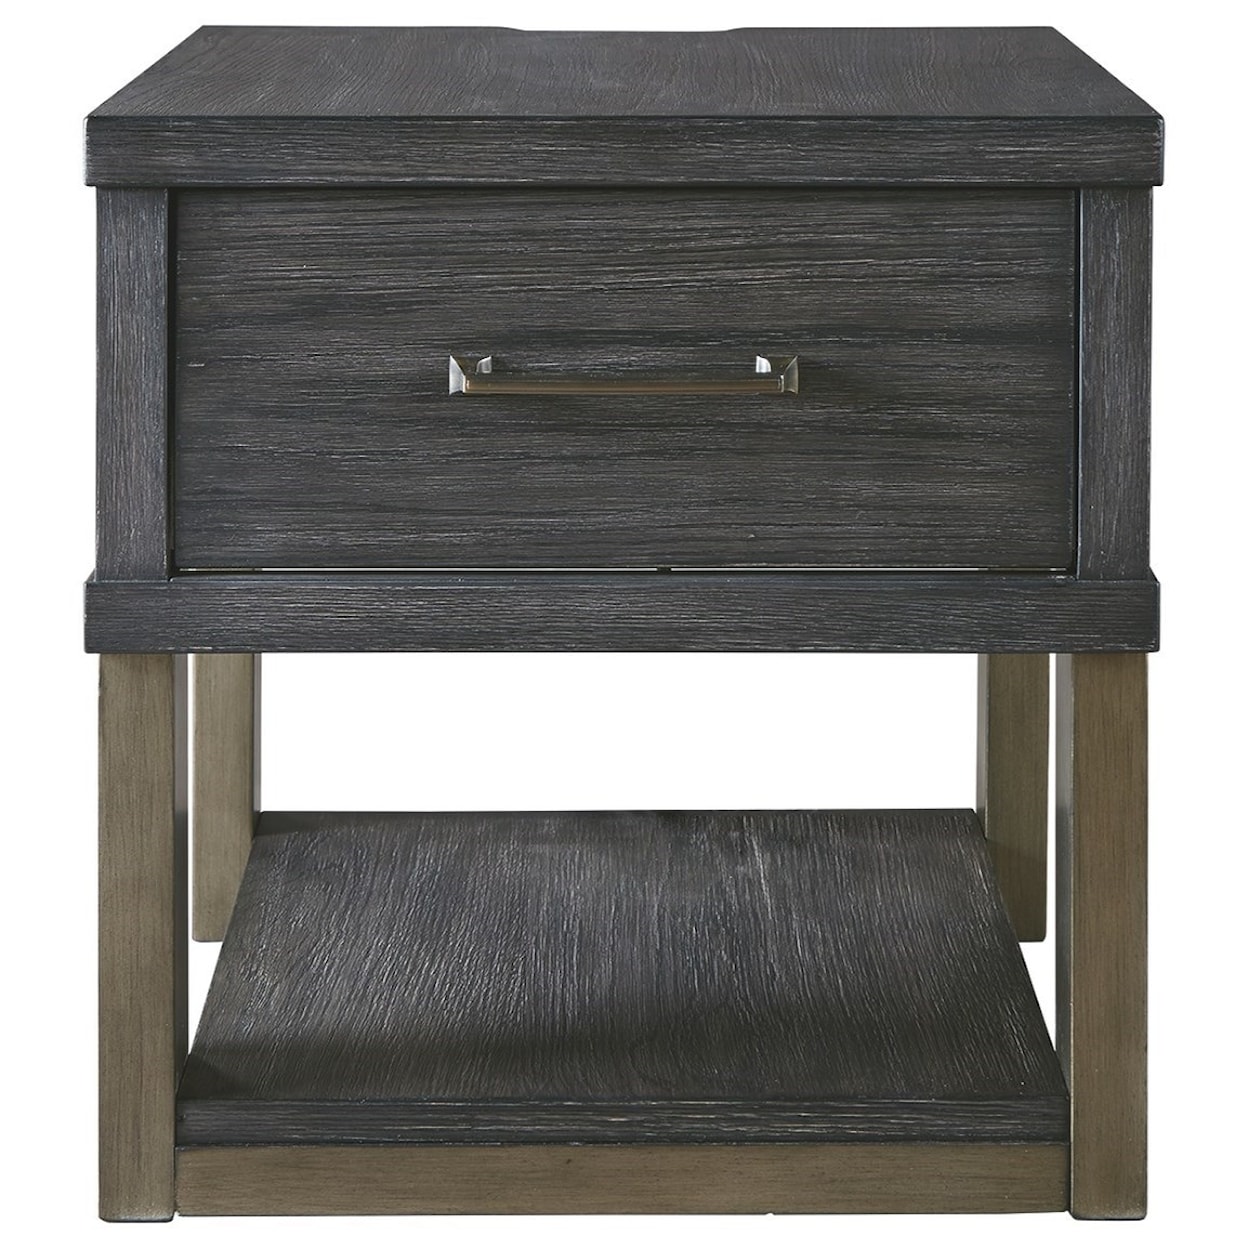 Signature Design by Ashley Forleeza End Table